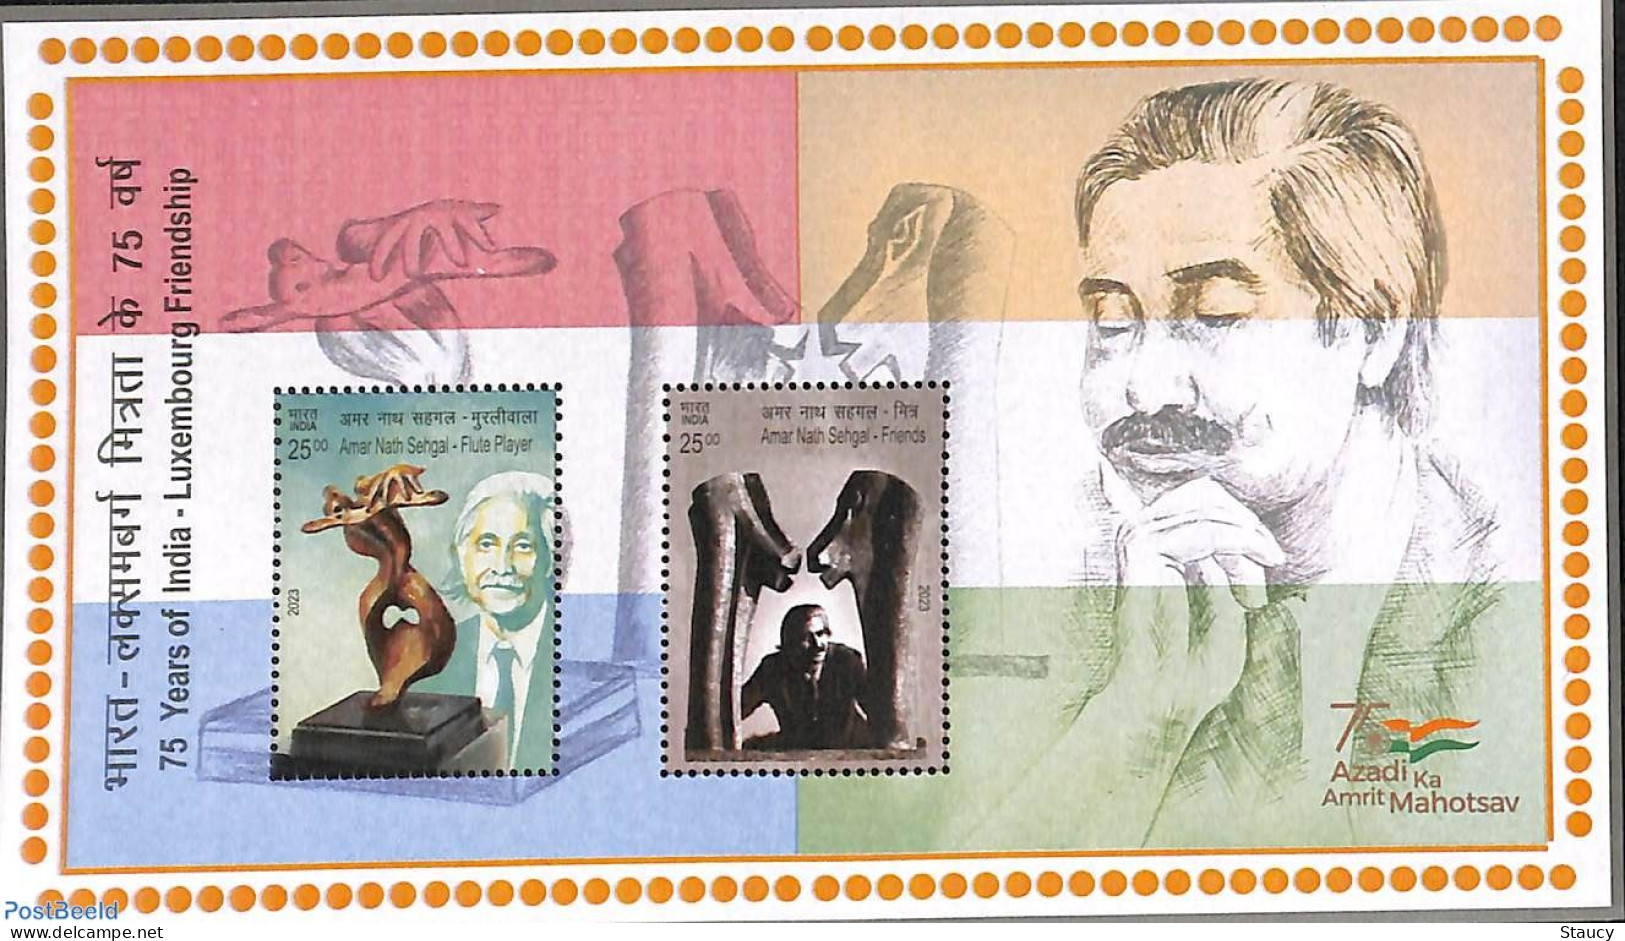 India 2023 Complete Year Collection of 11 Miniature Sheet MS / SS MNH year Pack as per scan RARE to get